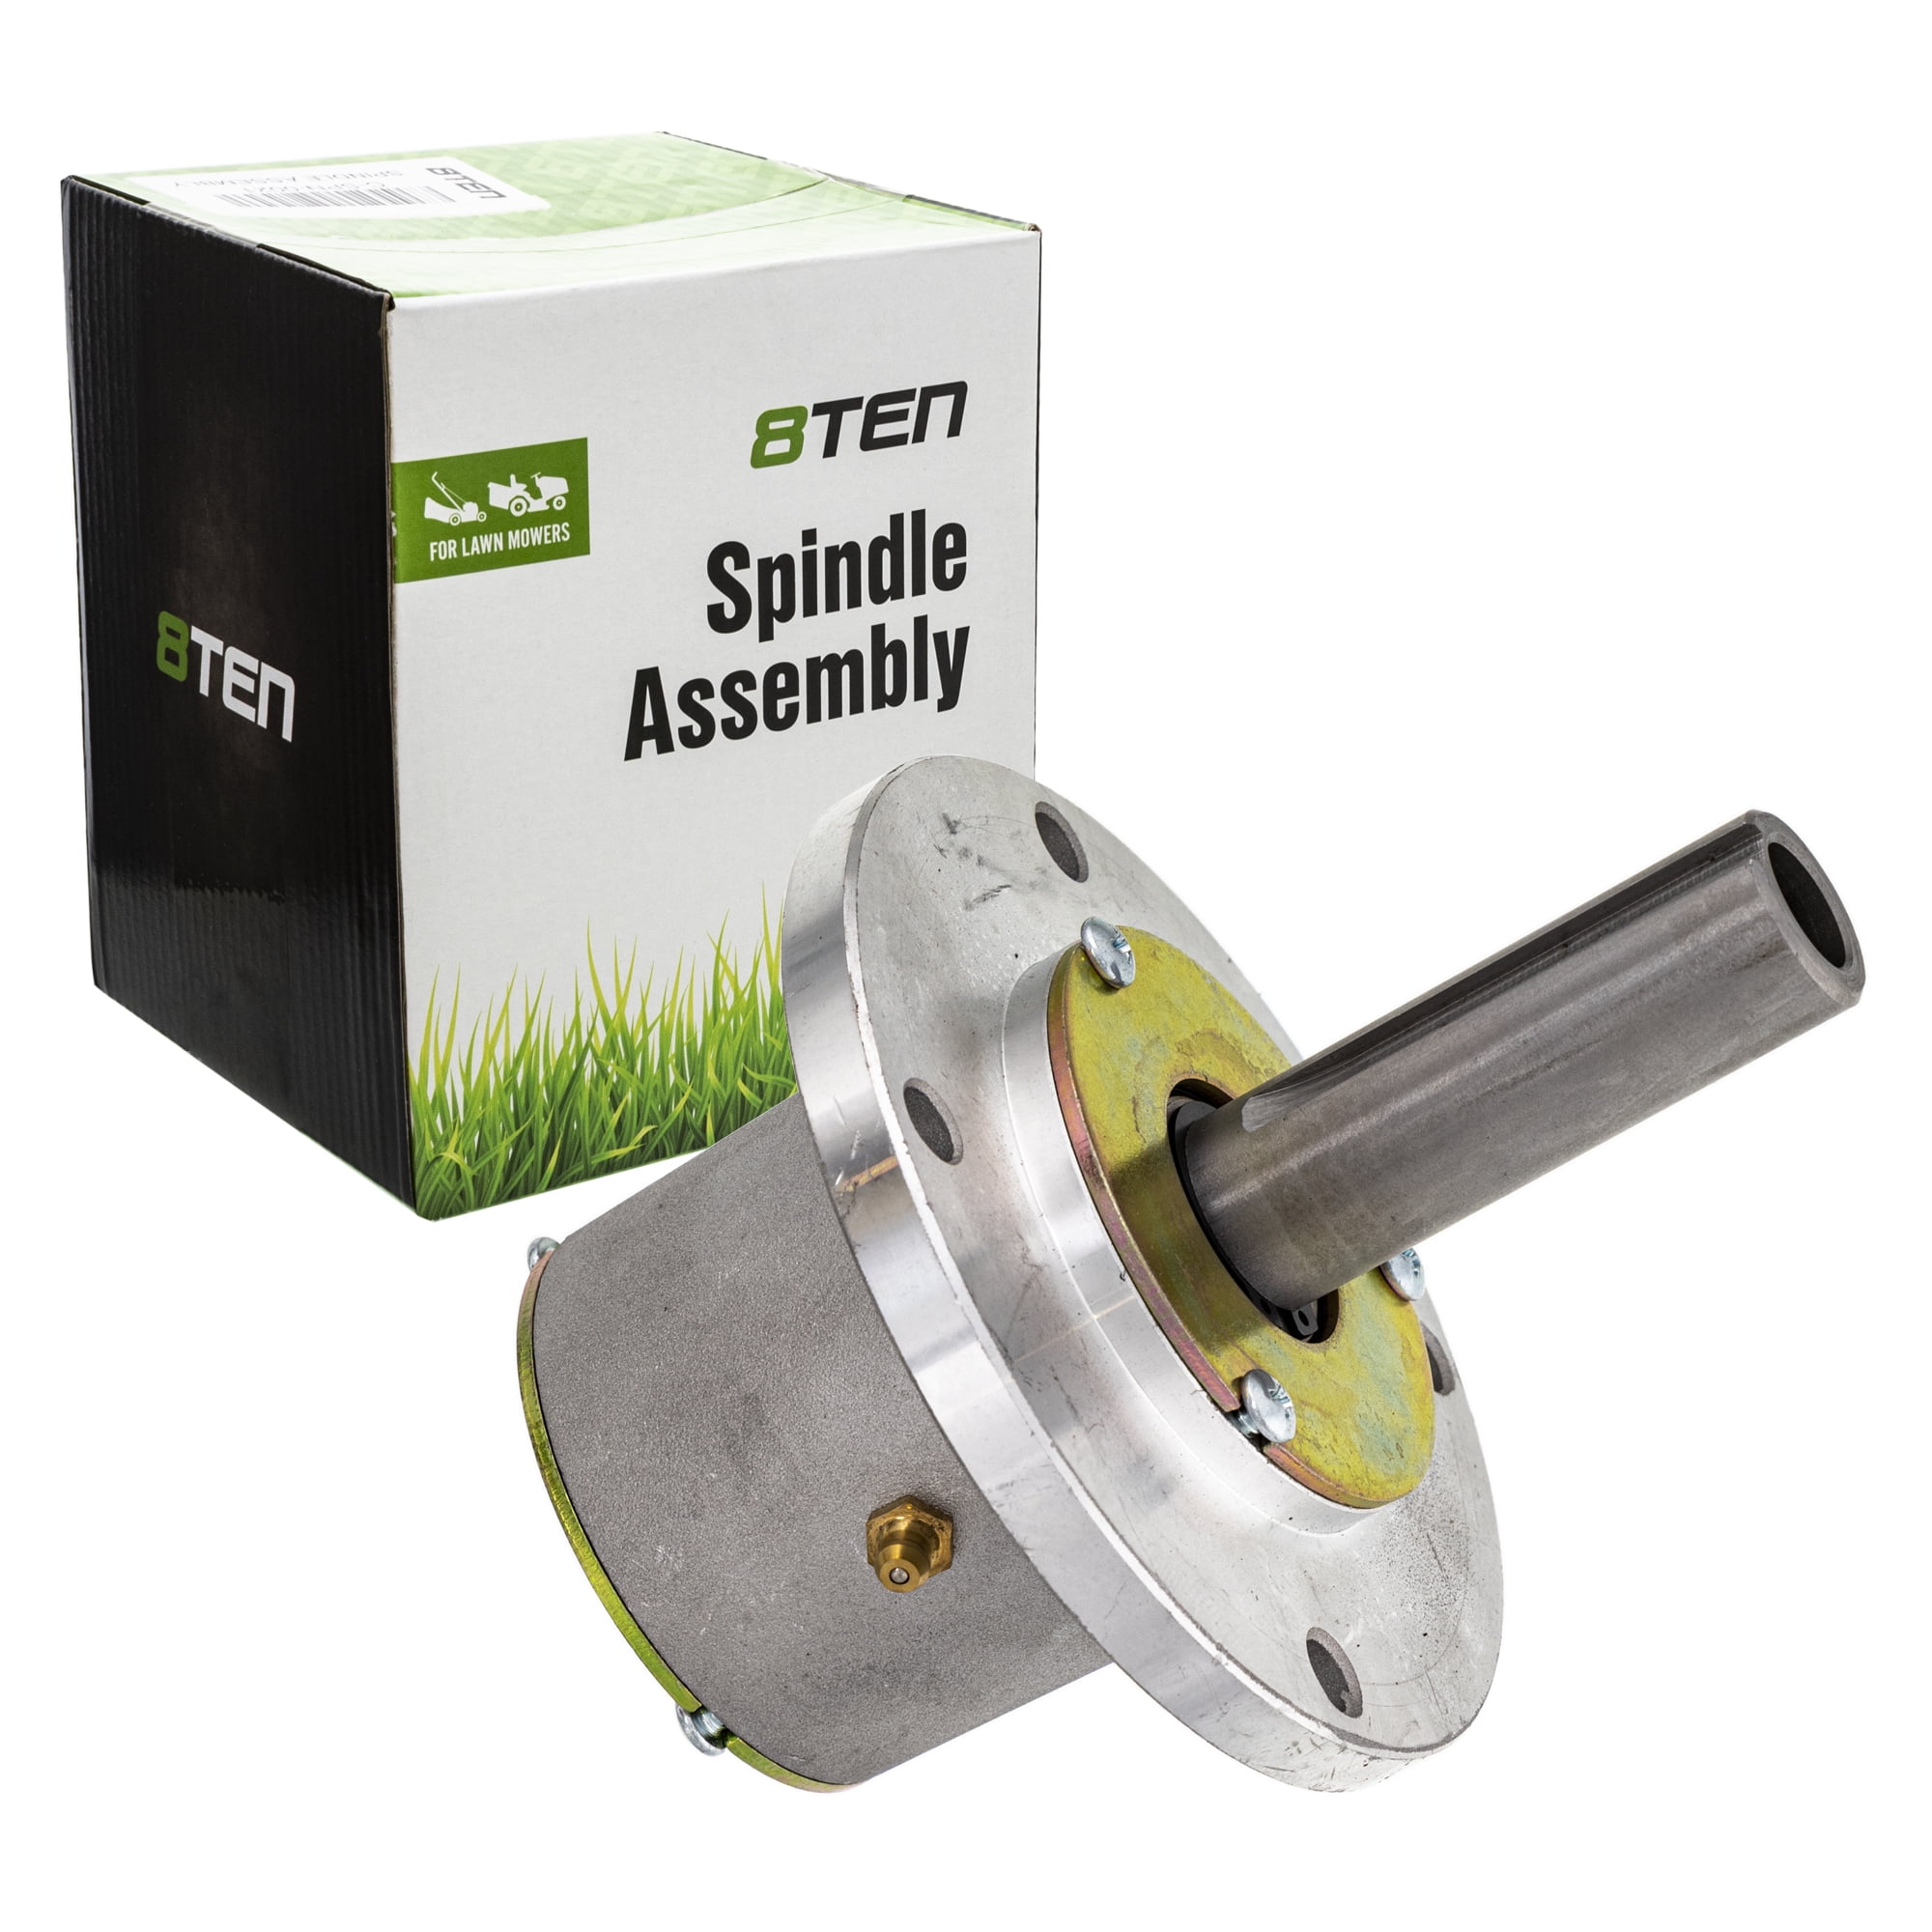 New Stens 285-217 Deck Spindle Assembly for Bunton & John Deere Lawn Mowers 